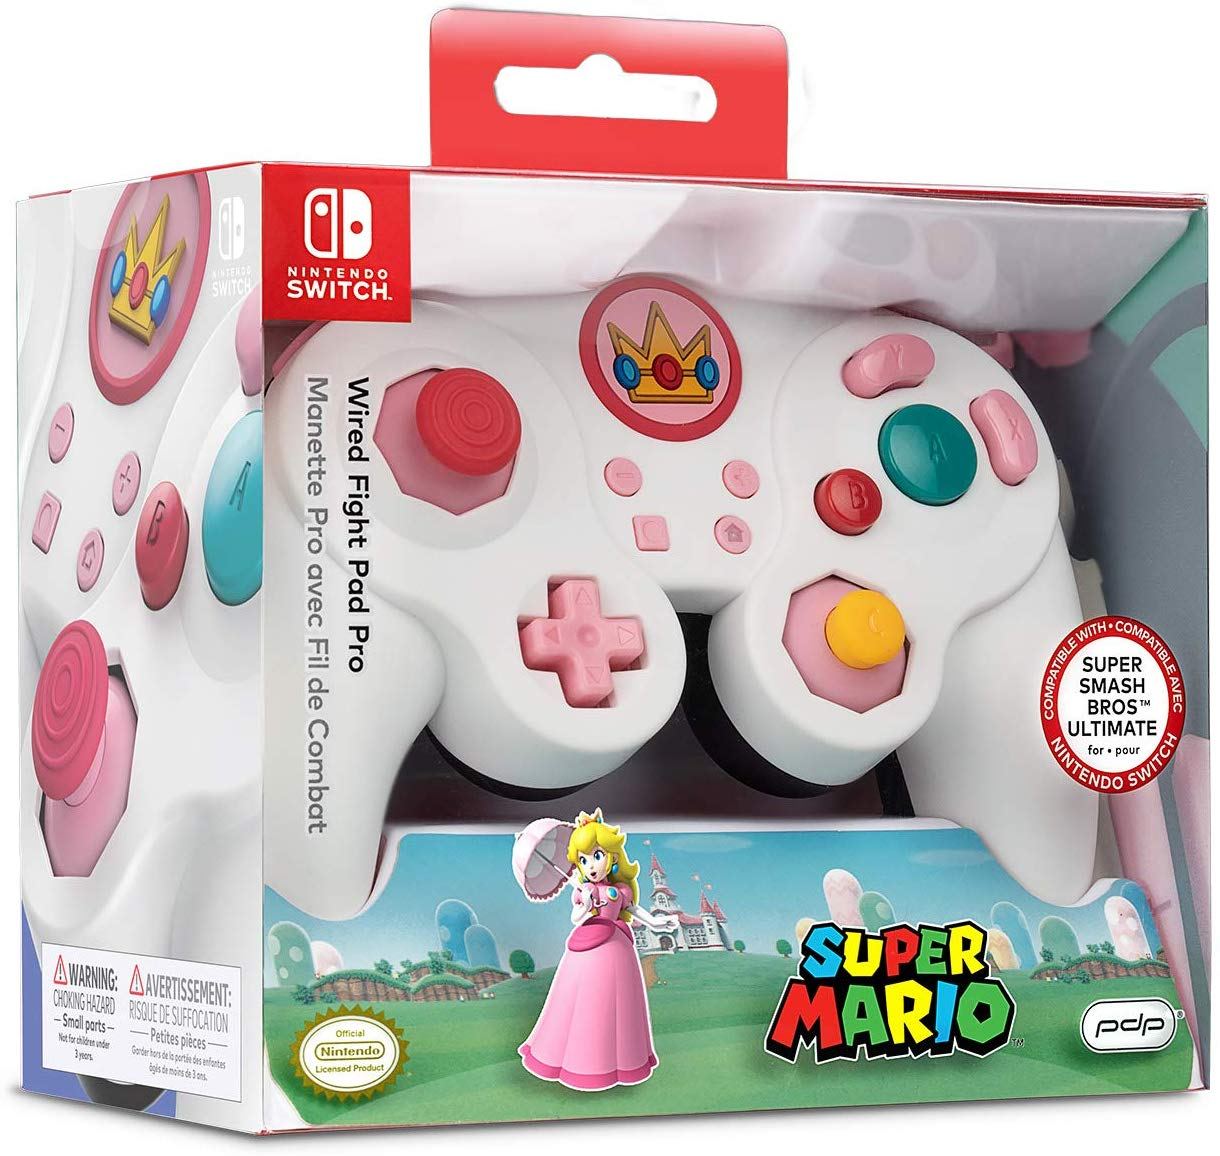 Super Mario Bros Princess Peach Wired Fight Pad Pro for Nintendo Switch -  Bitcoin & Lightning accepted